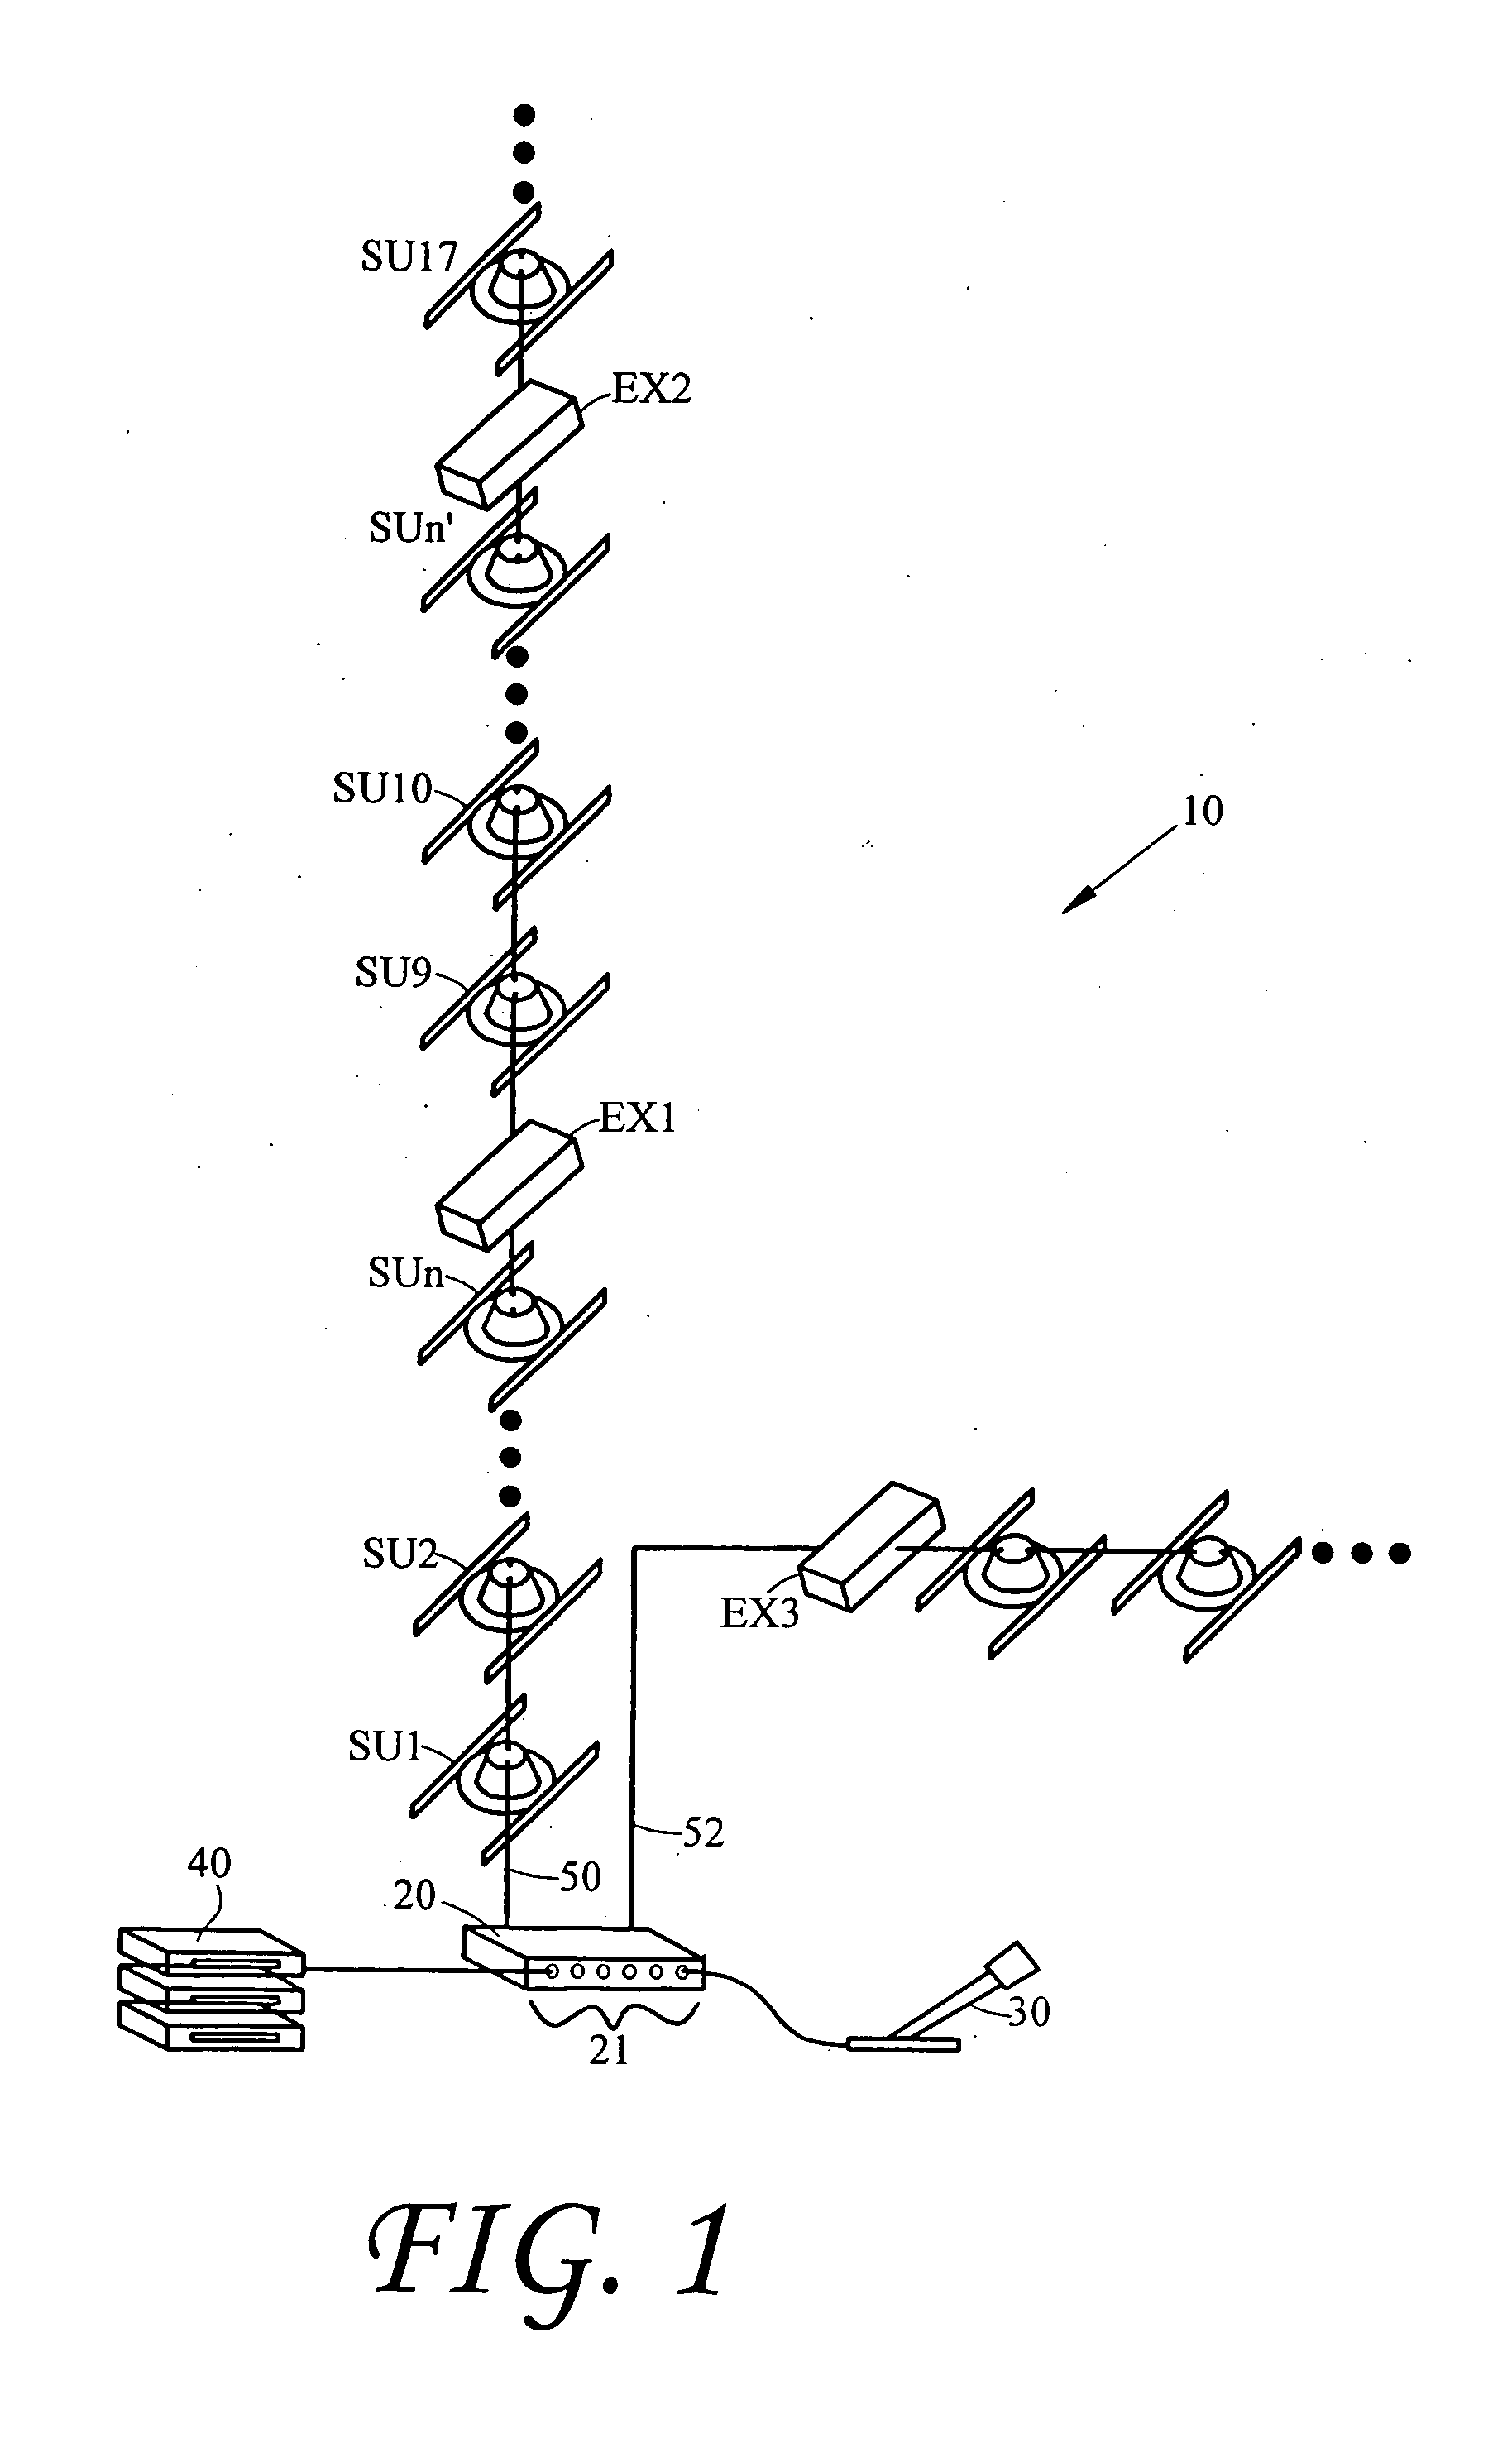 Digital power link audio distribution system and components thereof